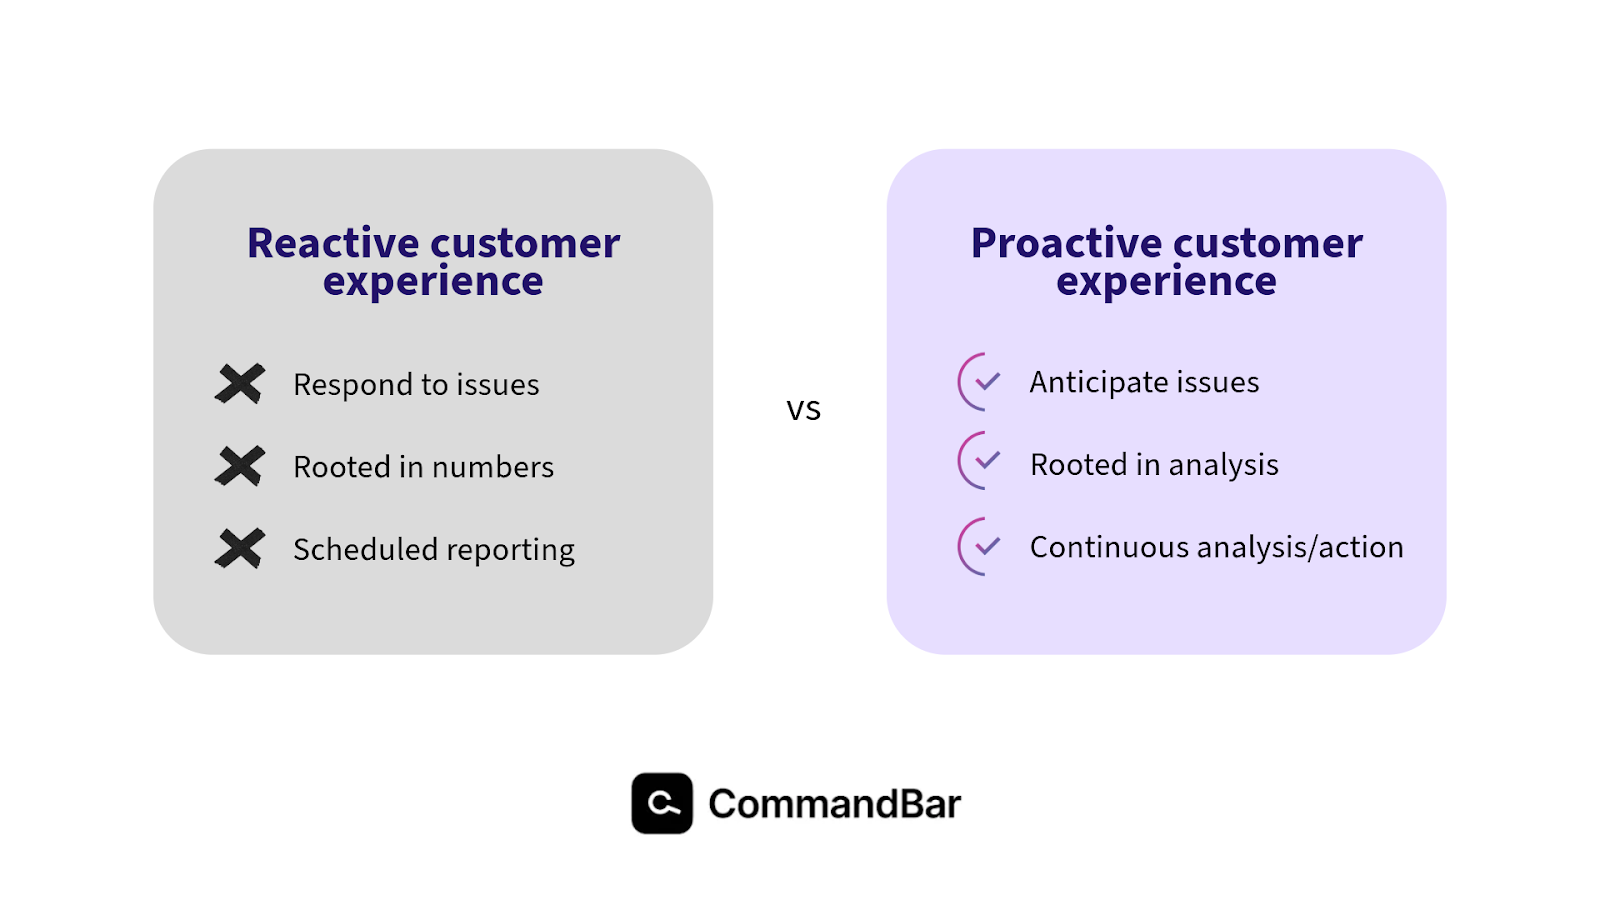 reactive customer experience management vs proactive customer experience management